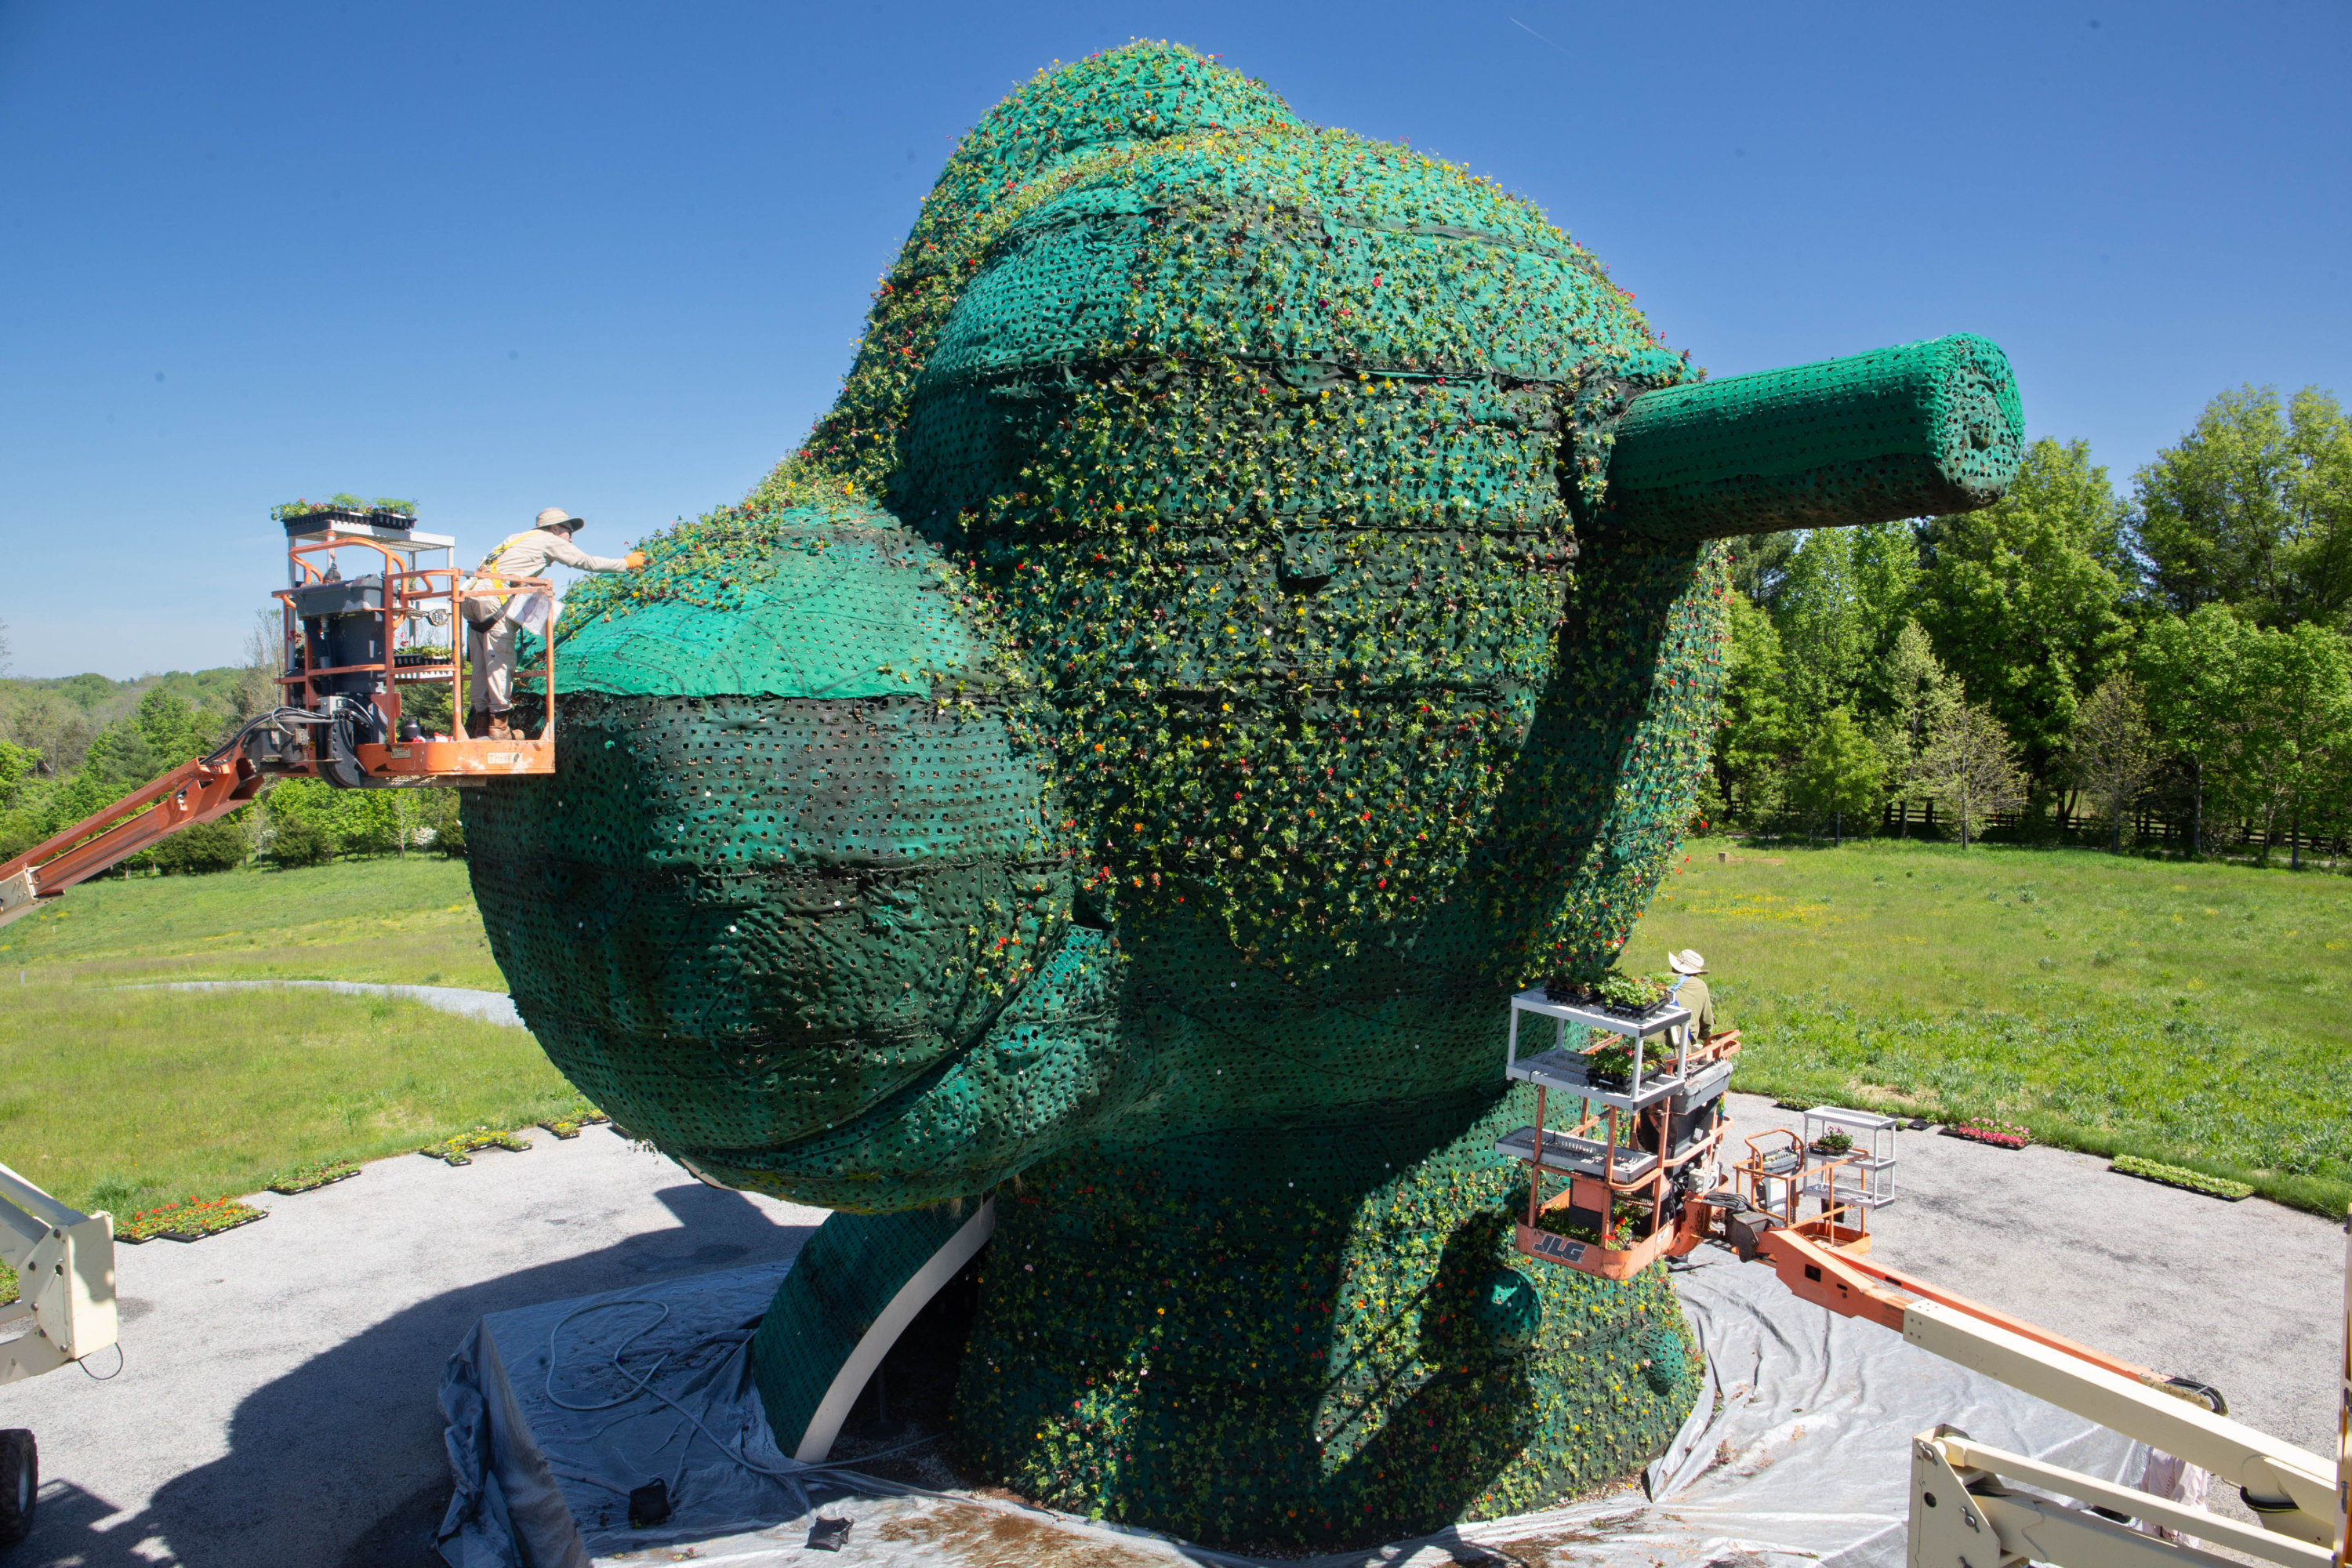 Glenstone's Jeff Koons Sculpture Has 24,000 Plants and One Seriously  Dedicated Caretaker